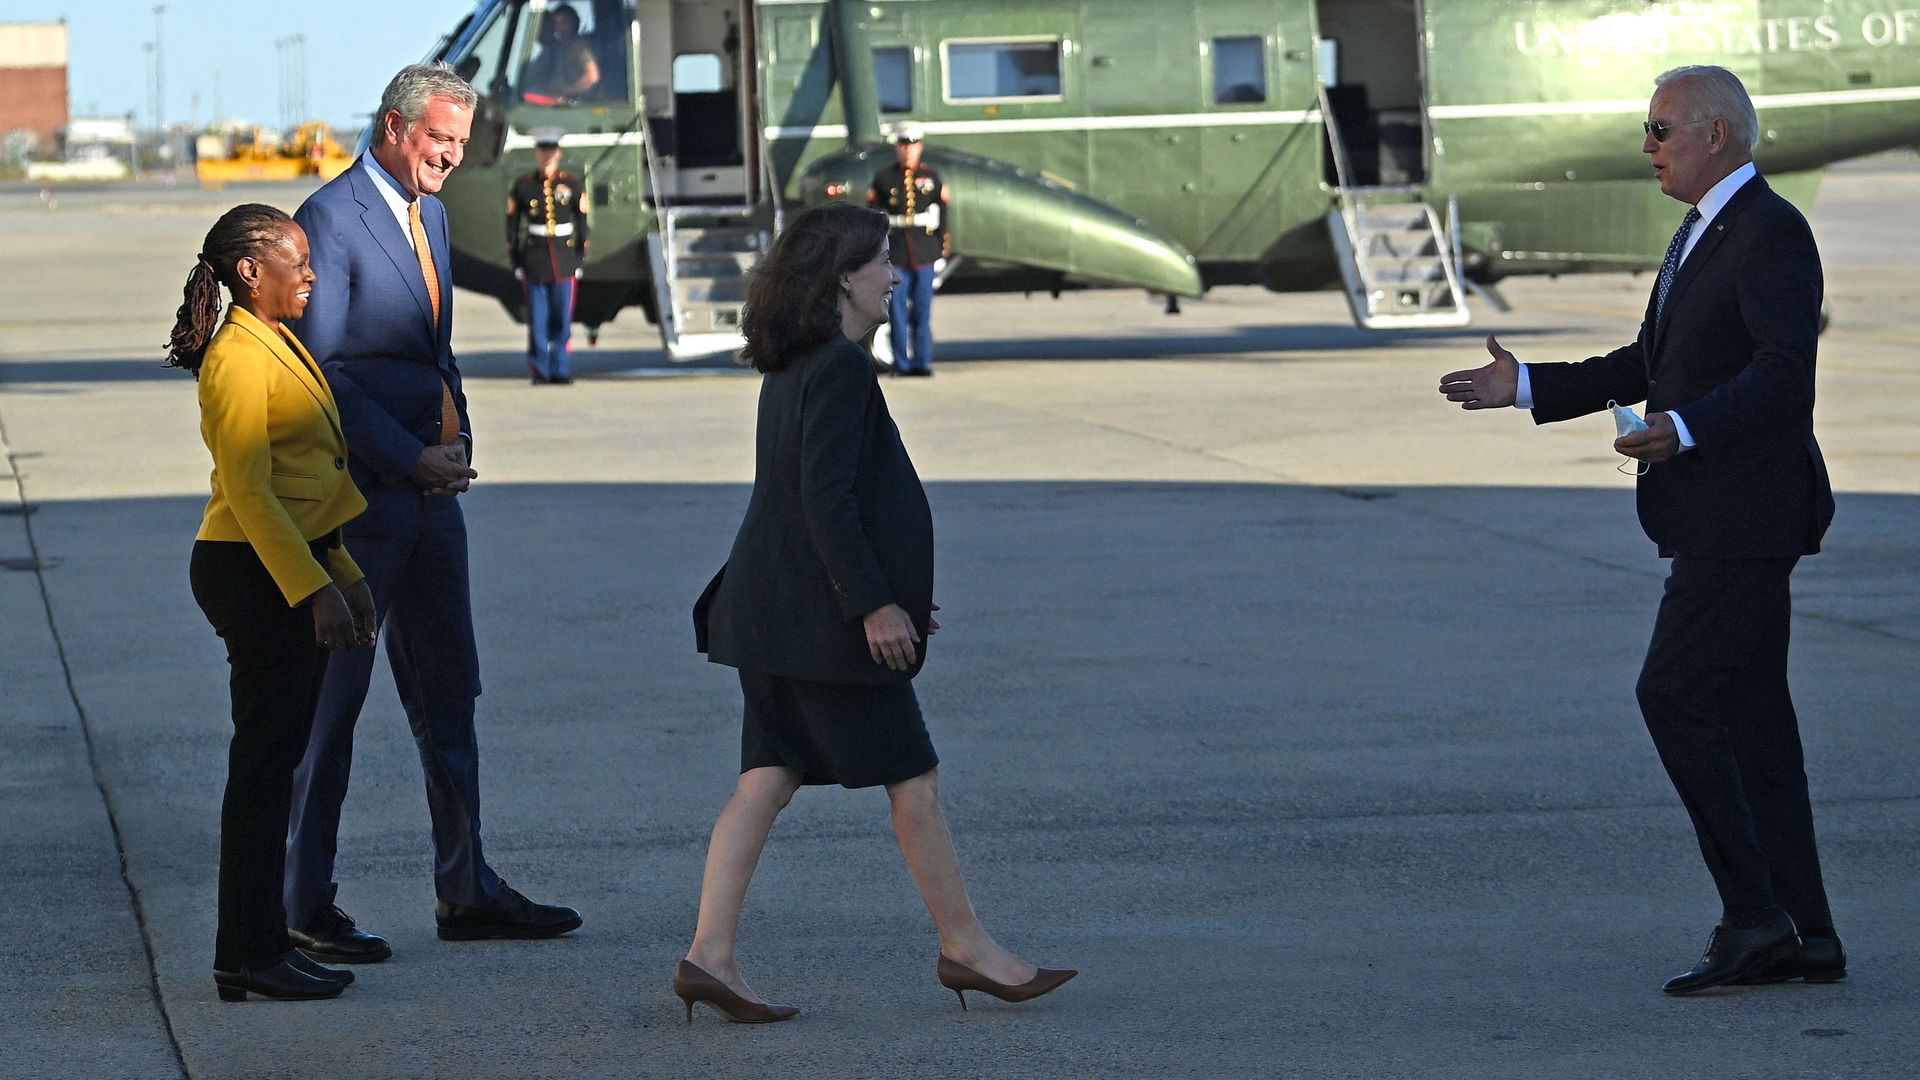 New York Gov. Kathy Hochul greets President Biden as he arrives for the United Nations General Assembly.